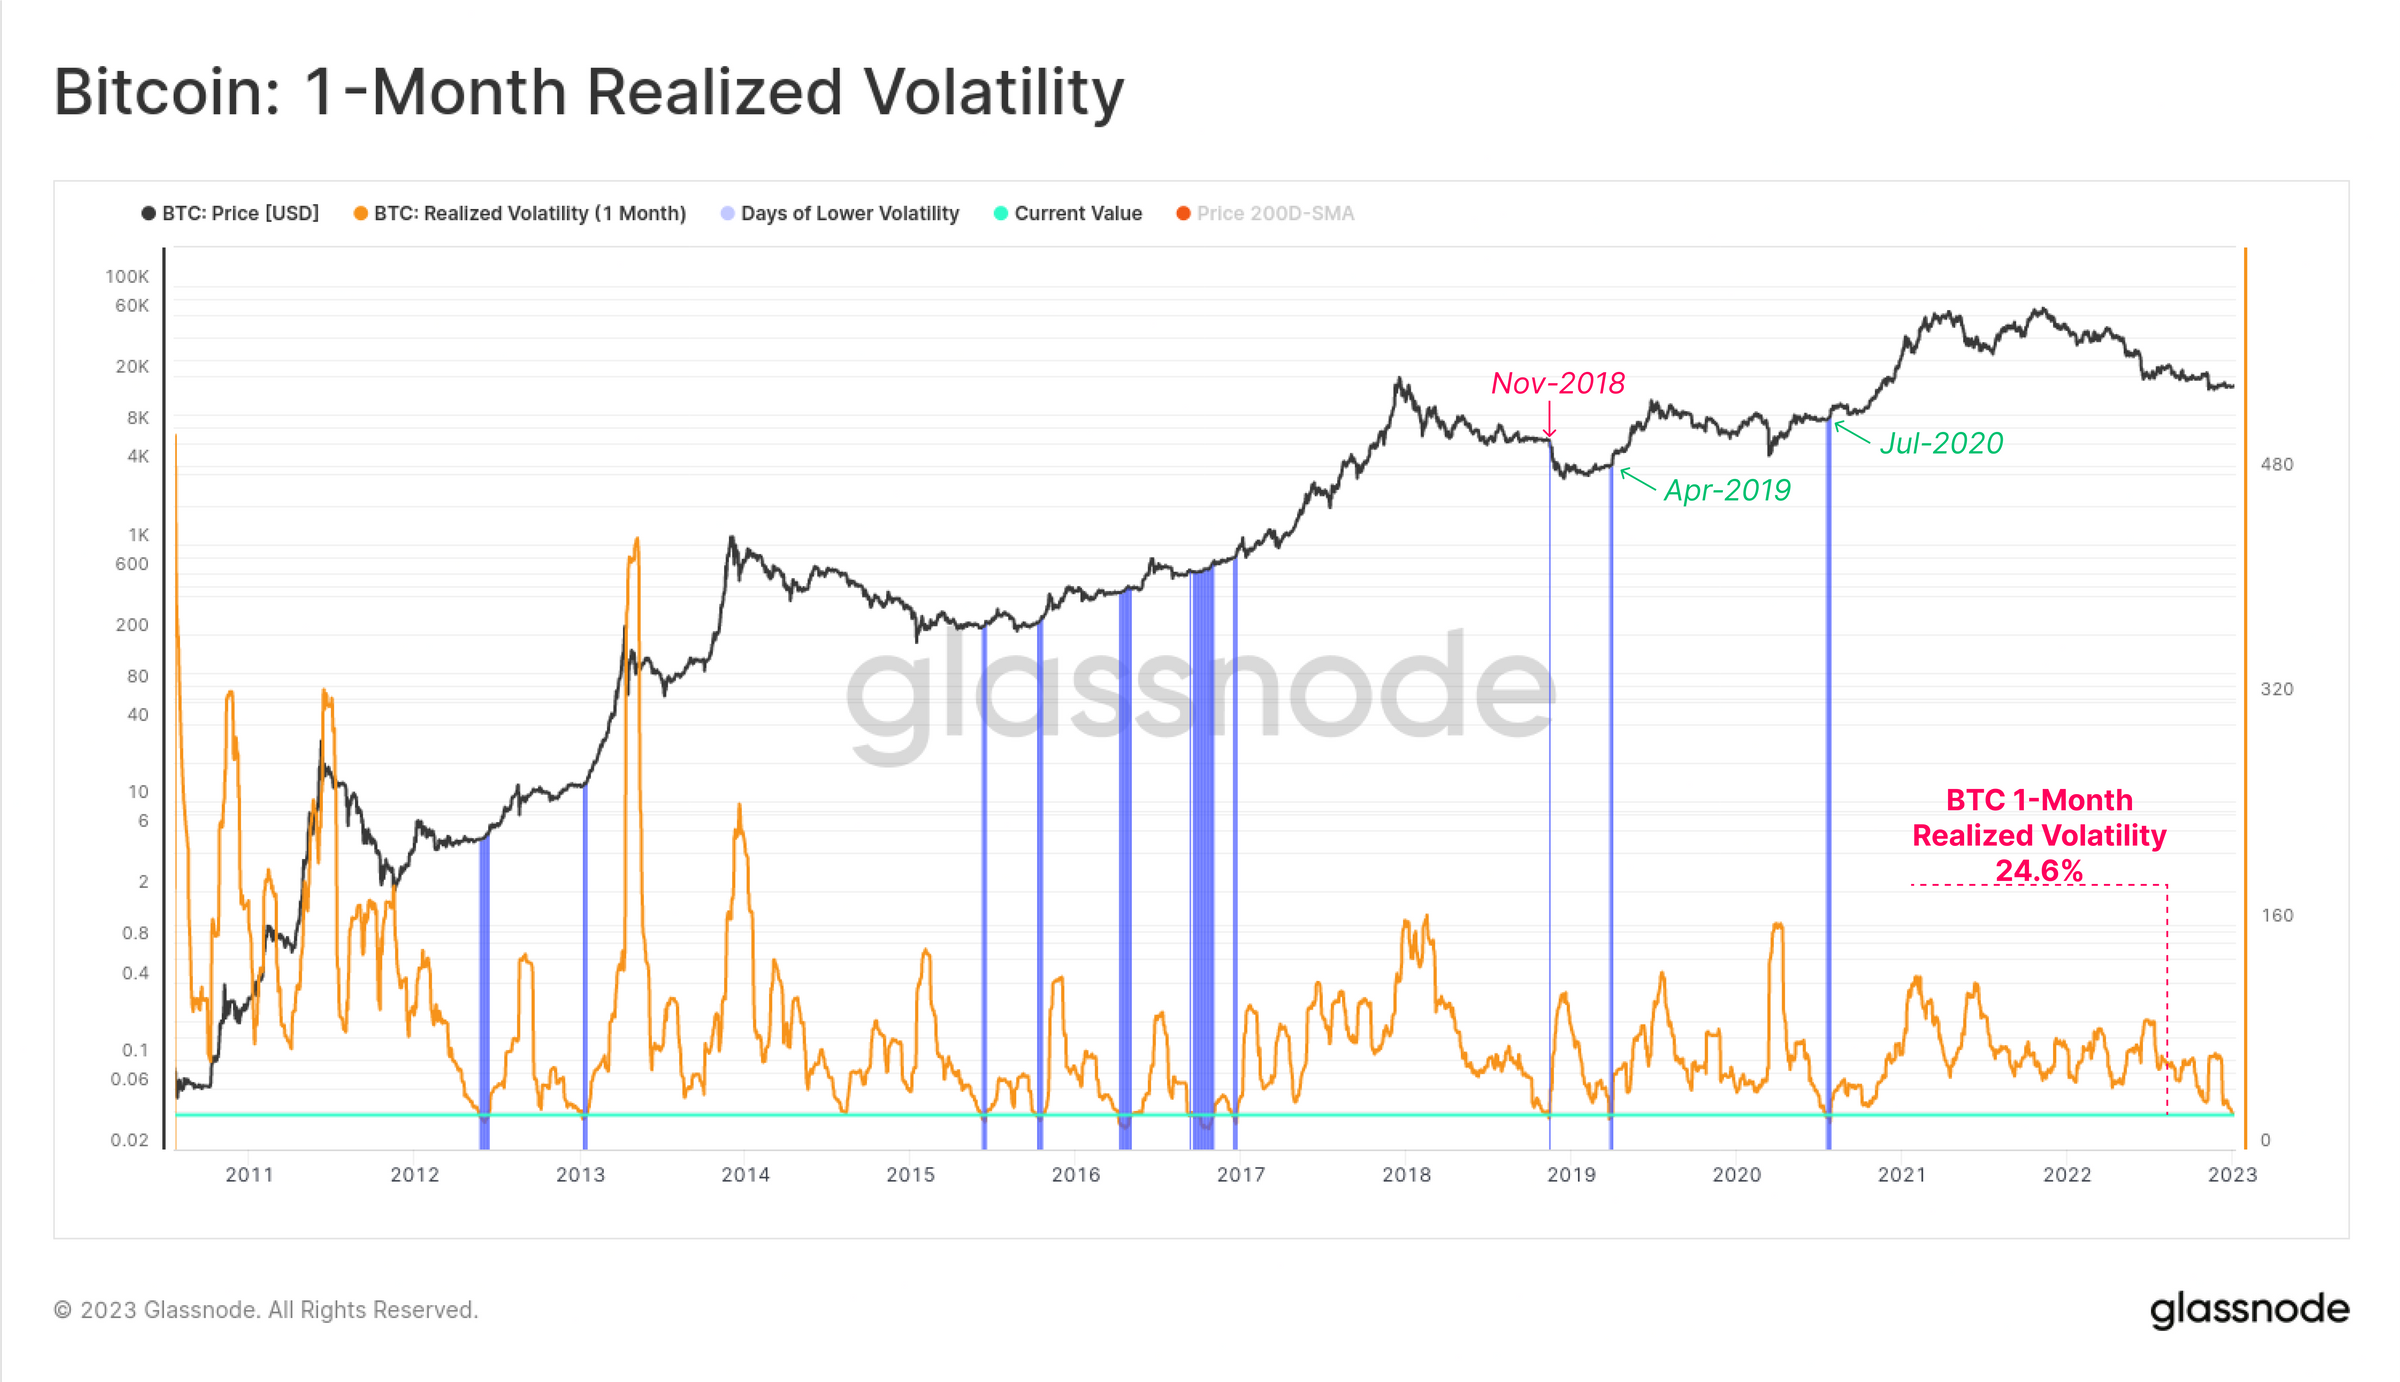 Bitcoin 1 month realized volatility